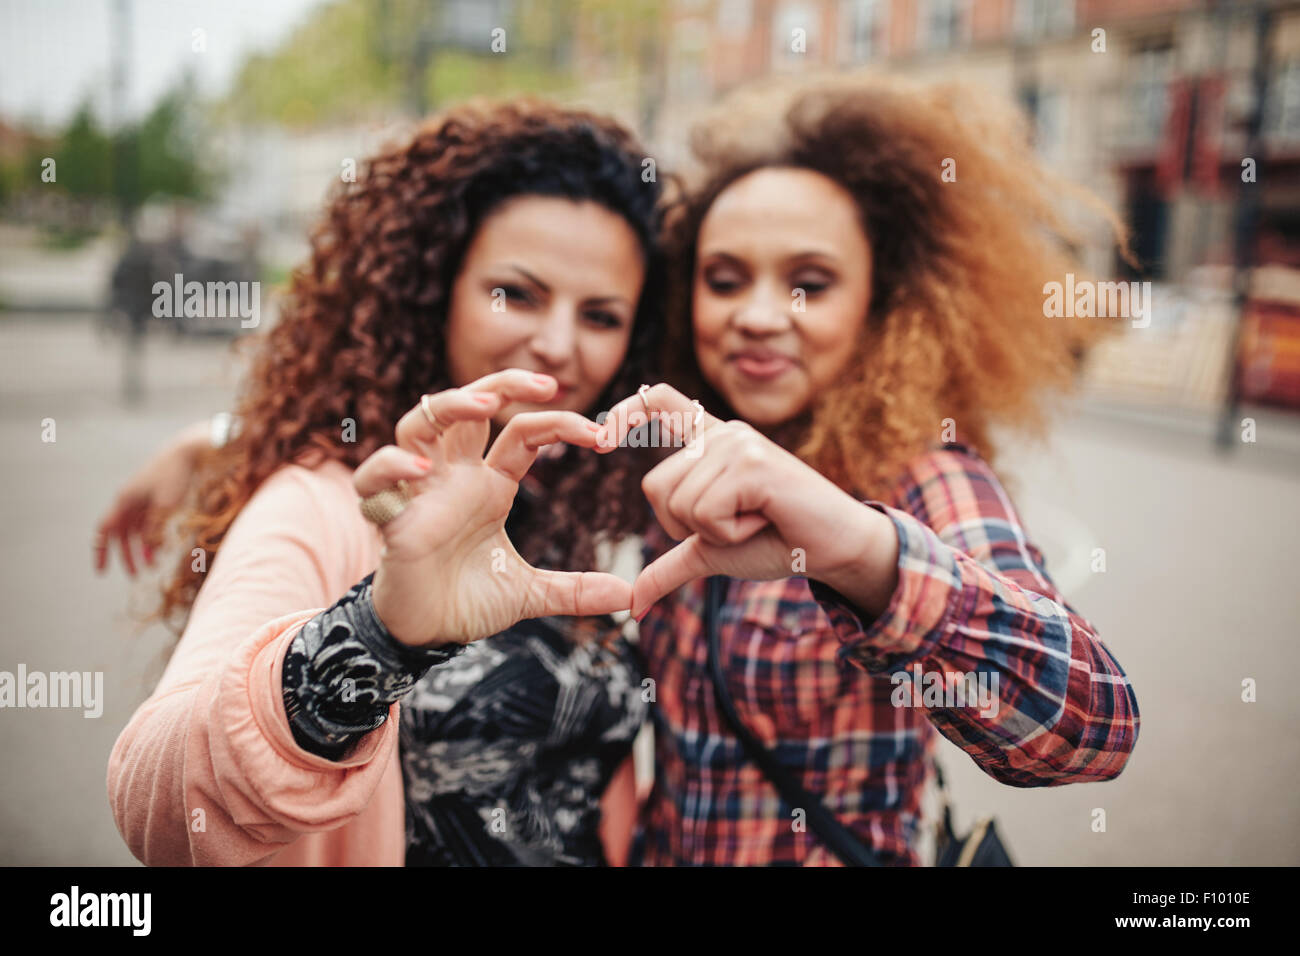 Happy young female friends making heart shape with hands and fingers. Two women standing together outdoors on city street. Focus Stock Photo